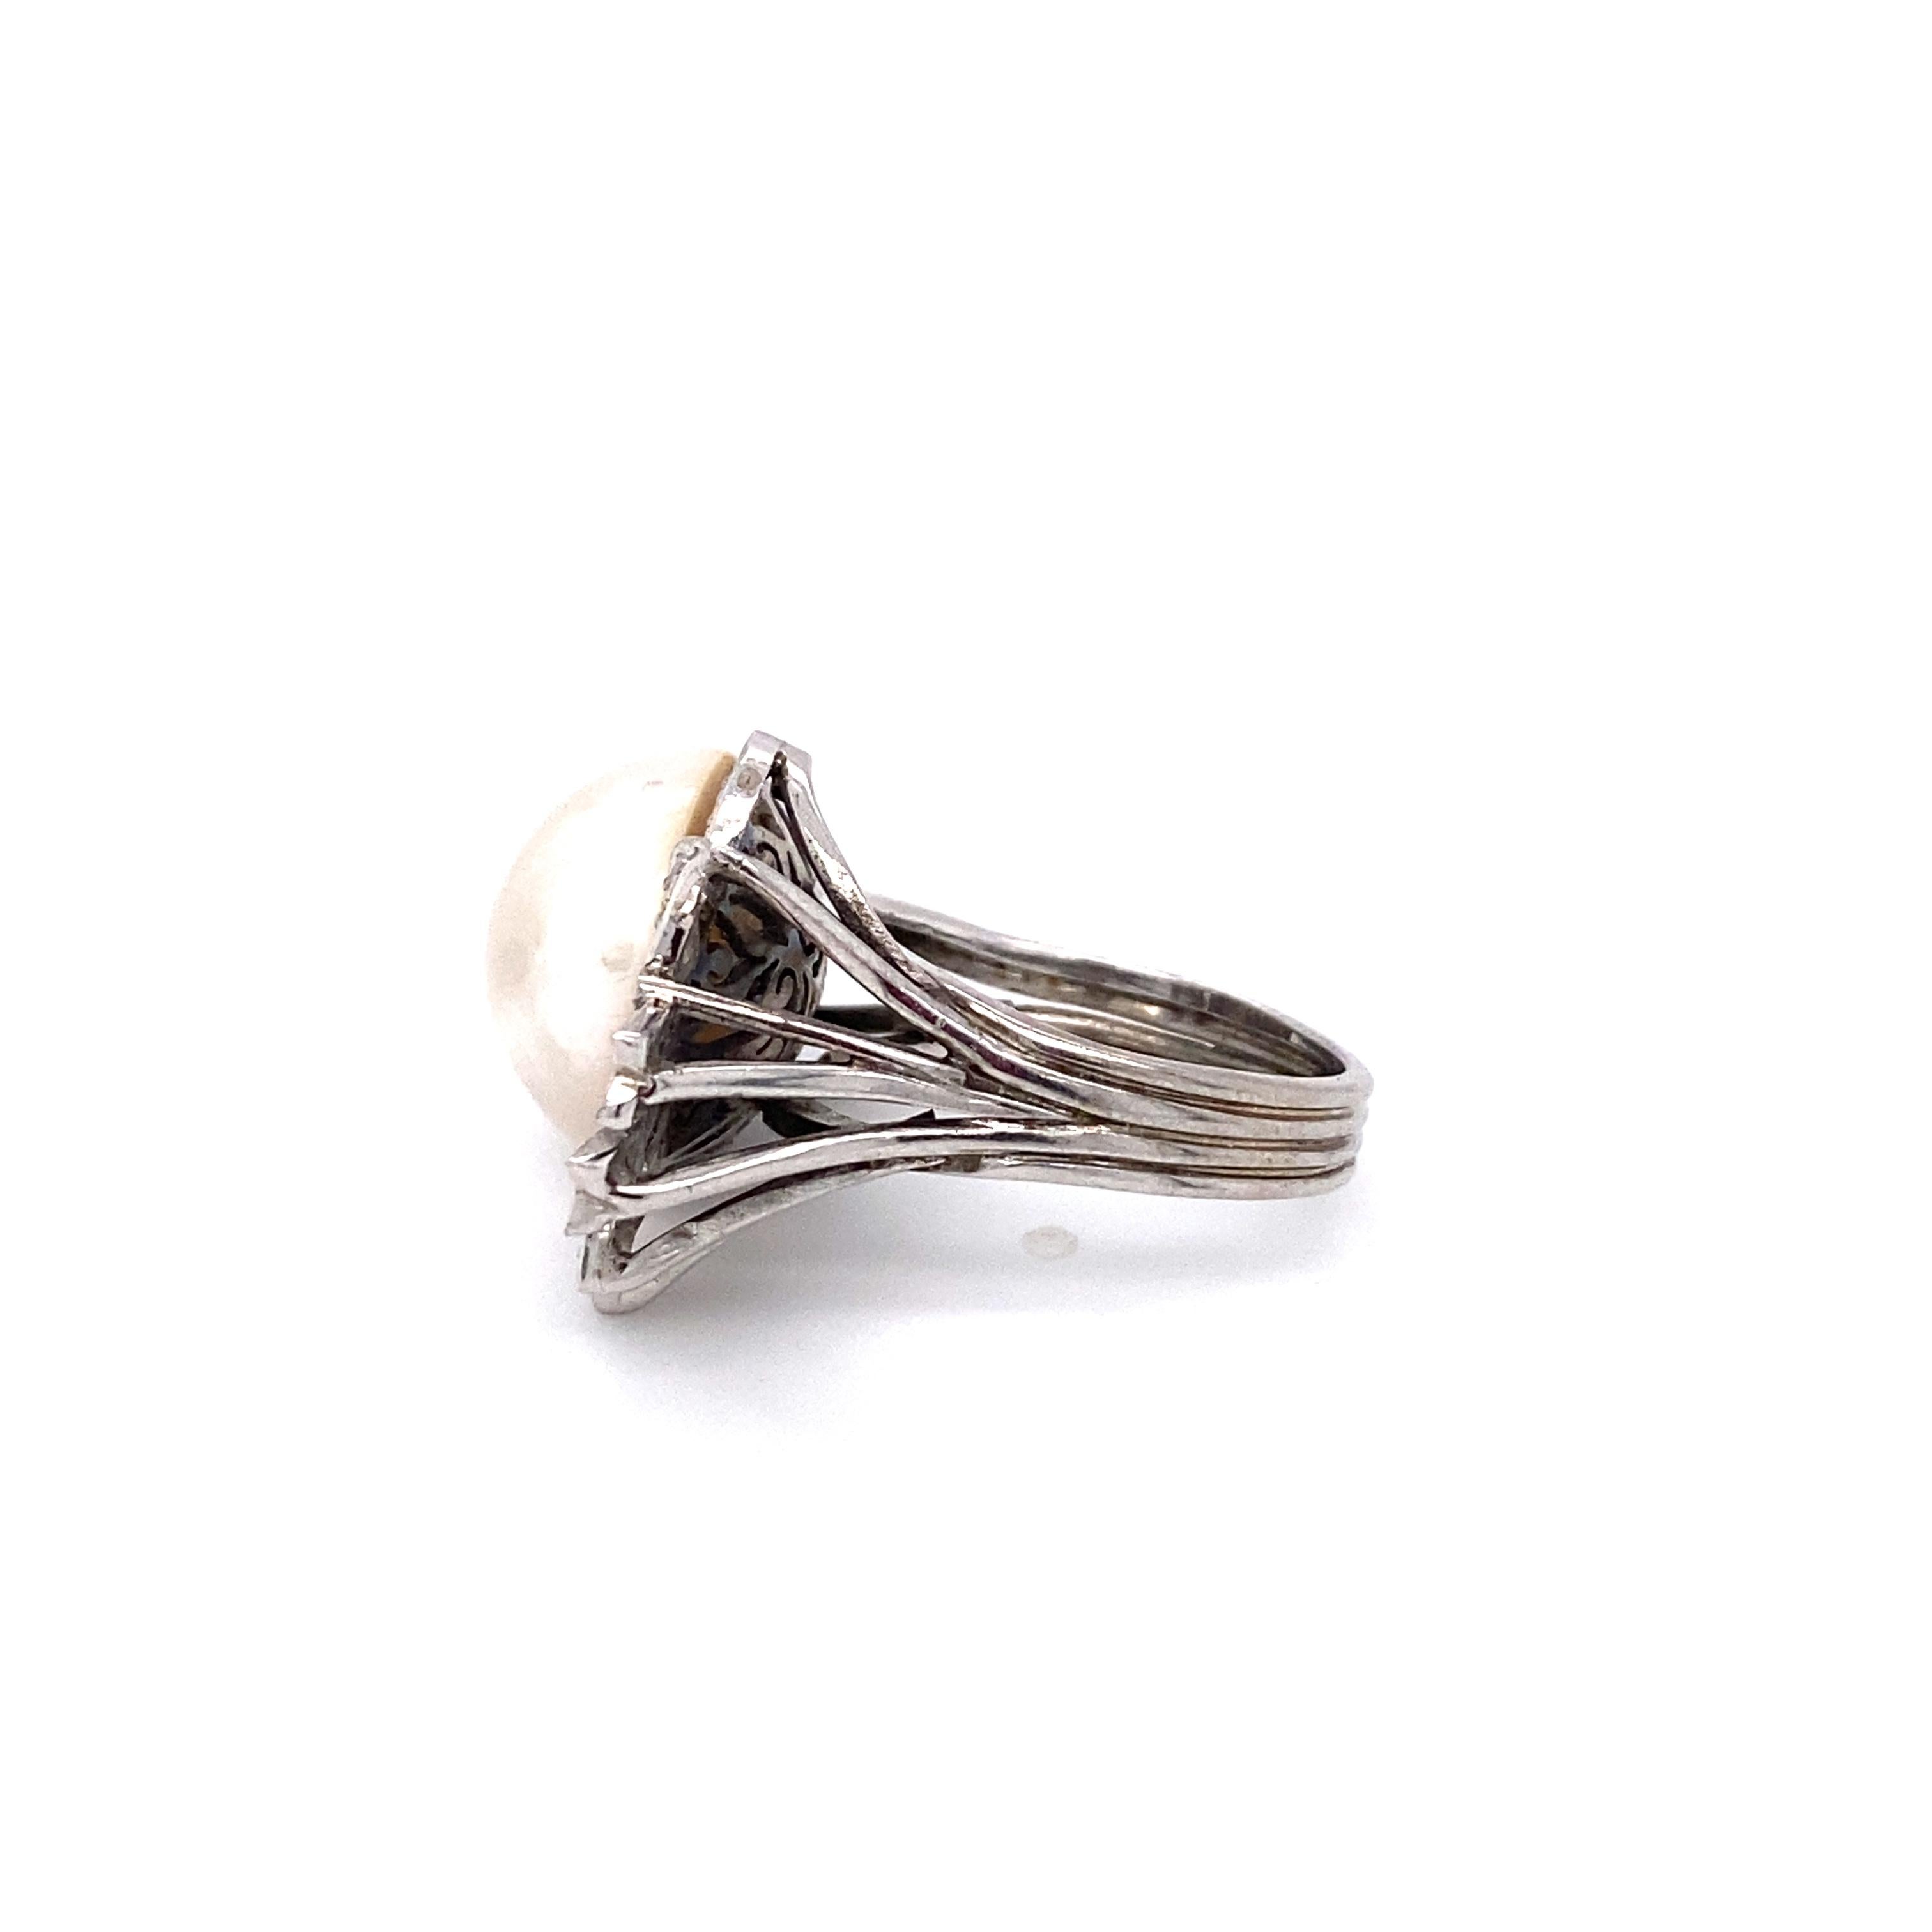 Art Deco 1930s Mabe Pearl and Diamond Ring in Platinum and 14 Karat White Gold